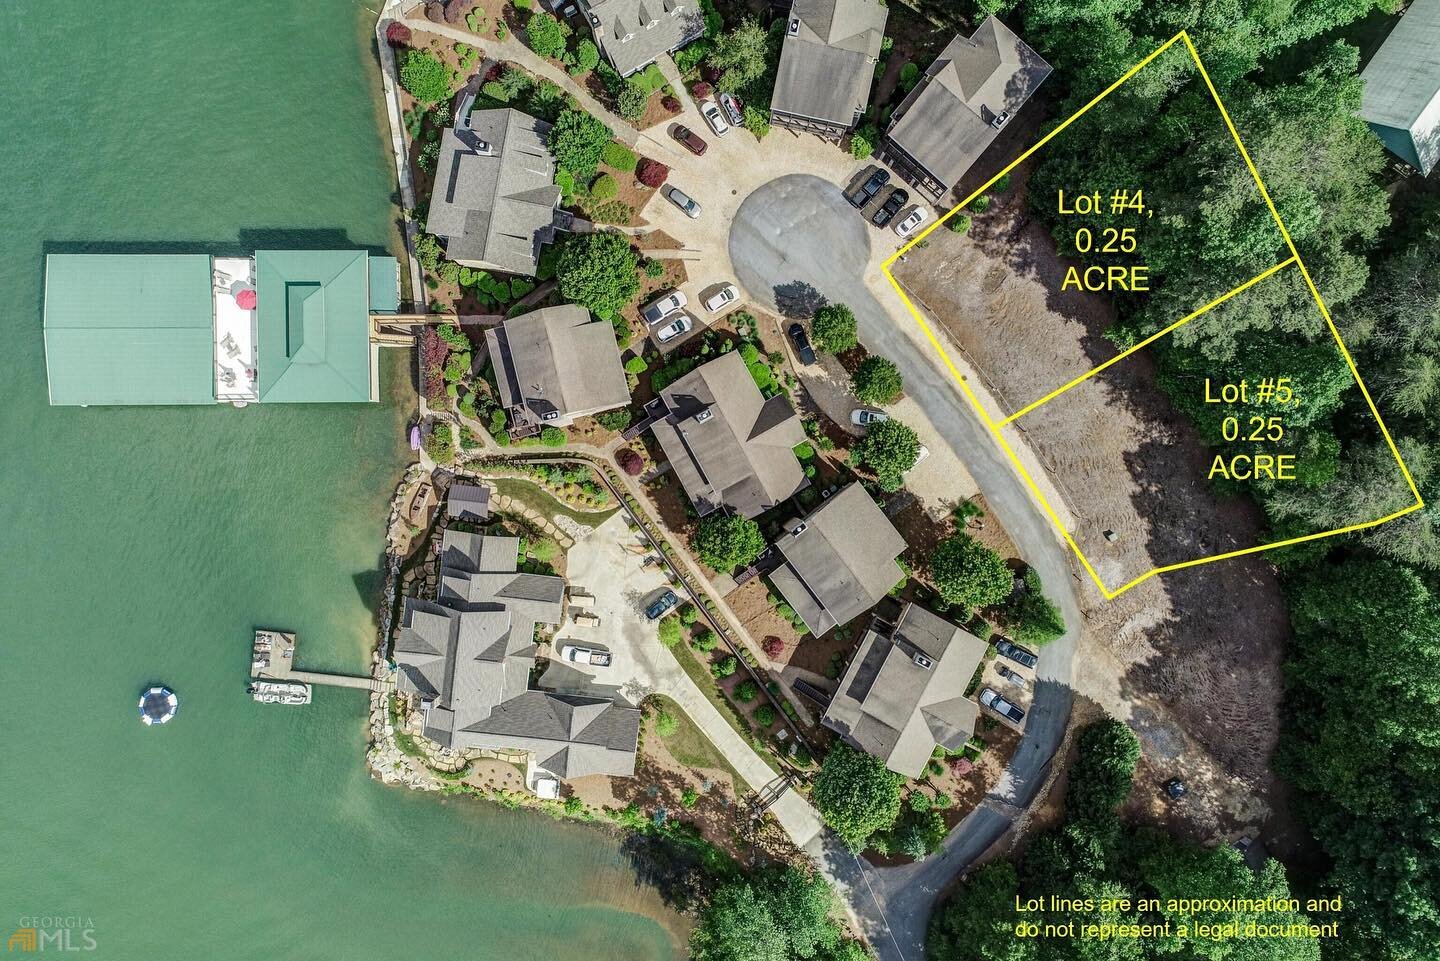 🚨SOLD🚨Seasons View Ct | Lot 4 | Lake Burton

🥳 CONGRATULATIONS 🥳 to our Buyer of this fabulous building lot in the Seasons at Lake Burton 🚤 This fee simple community features a deeded covered boat slip with lift, covered and screened pavilion, c